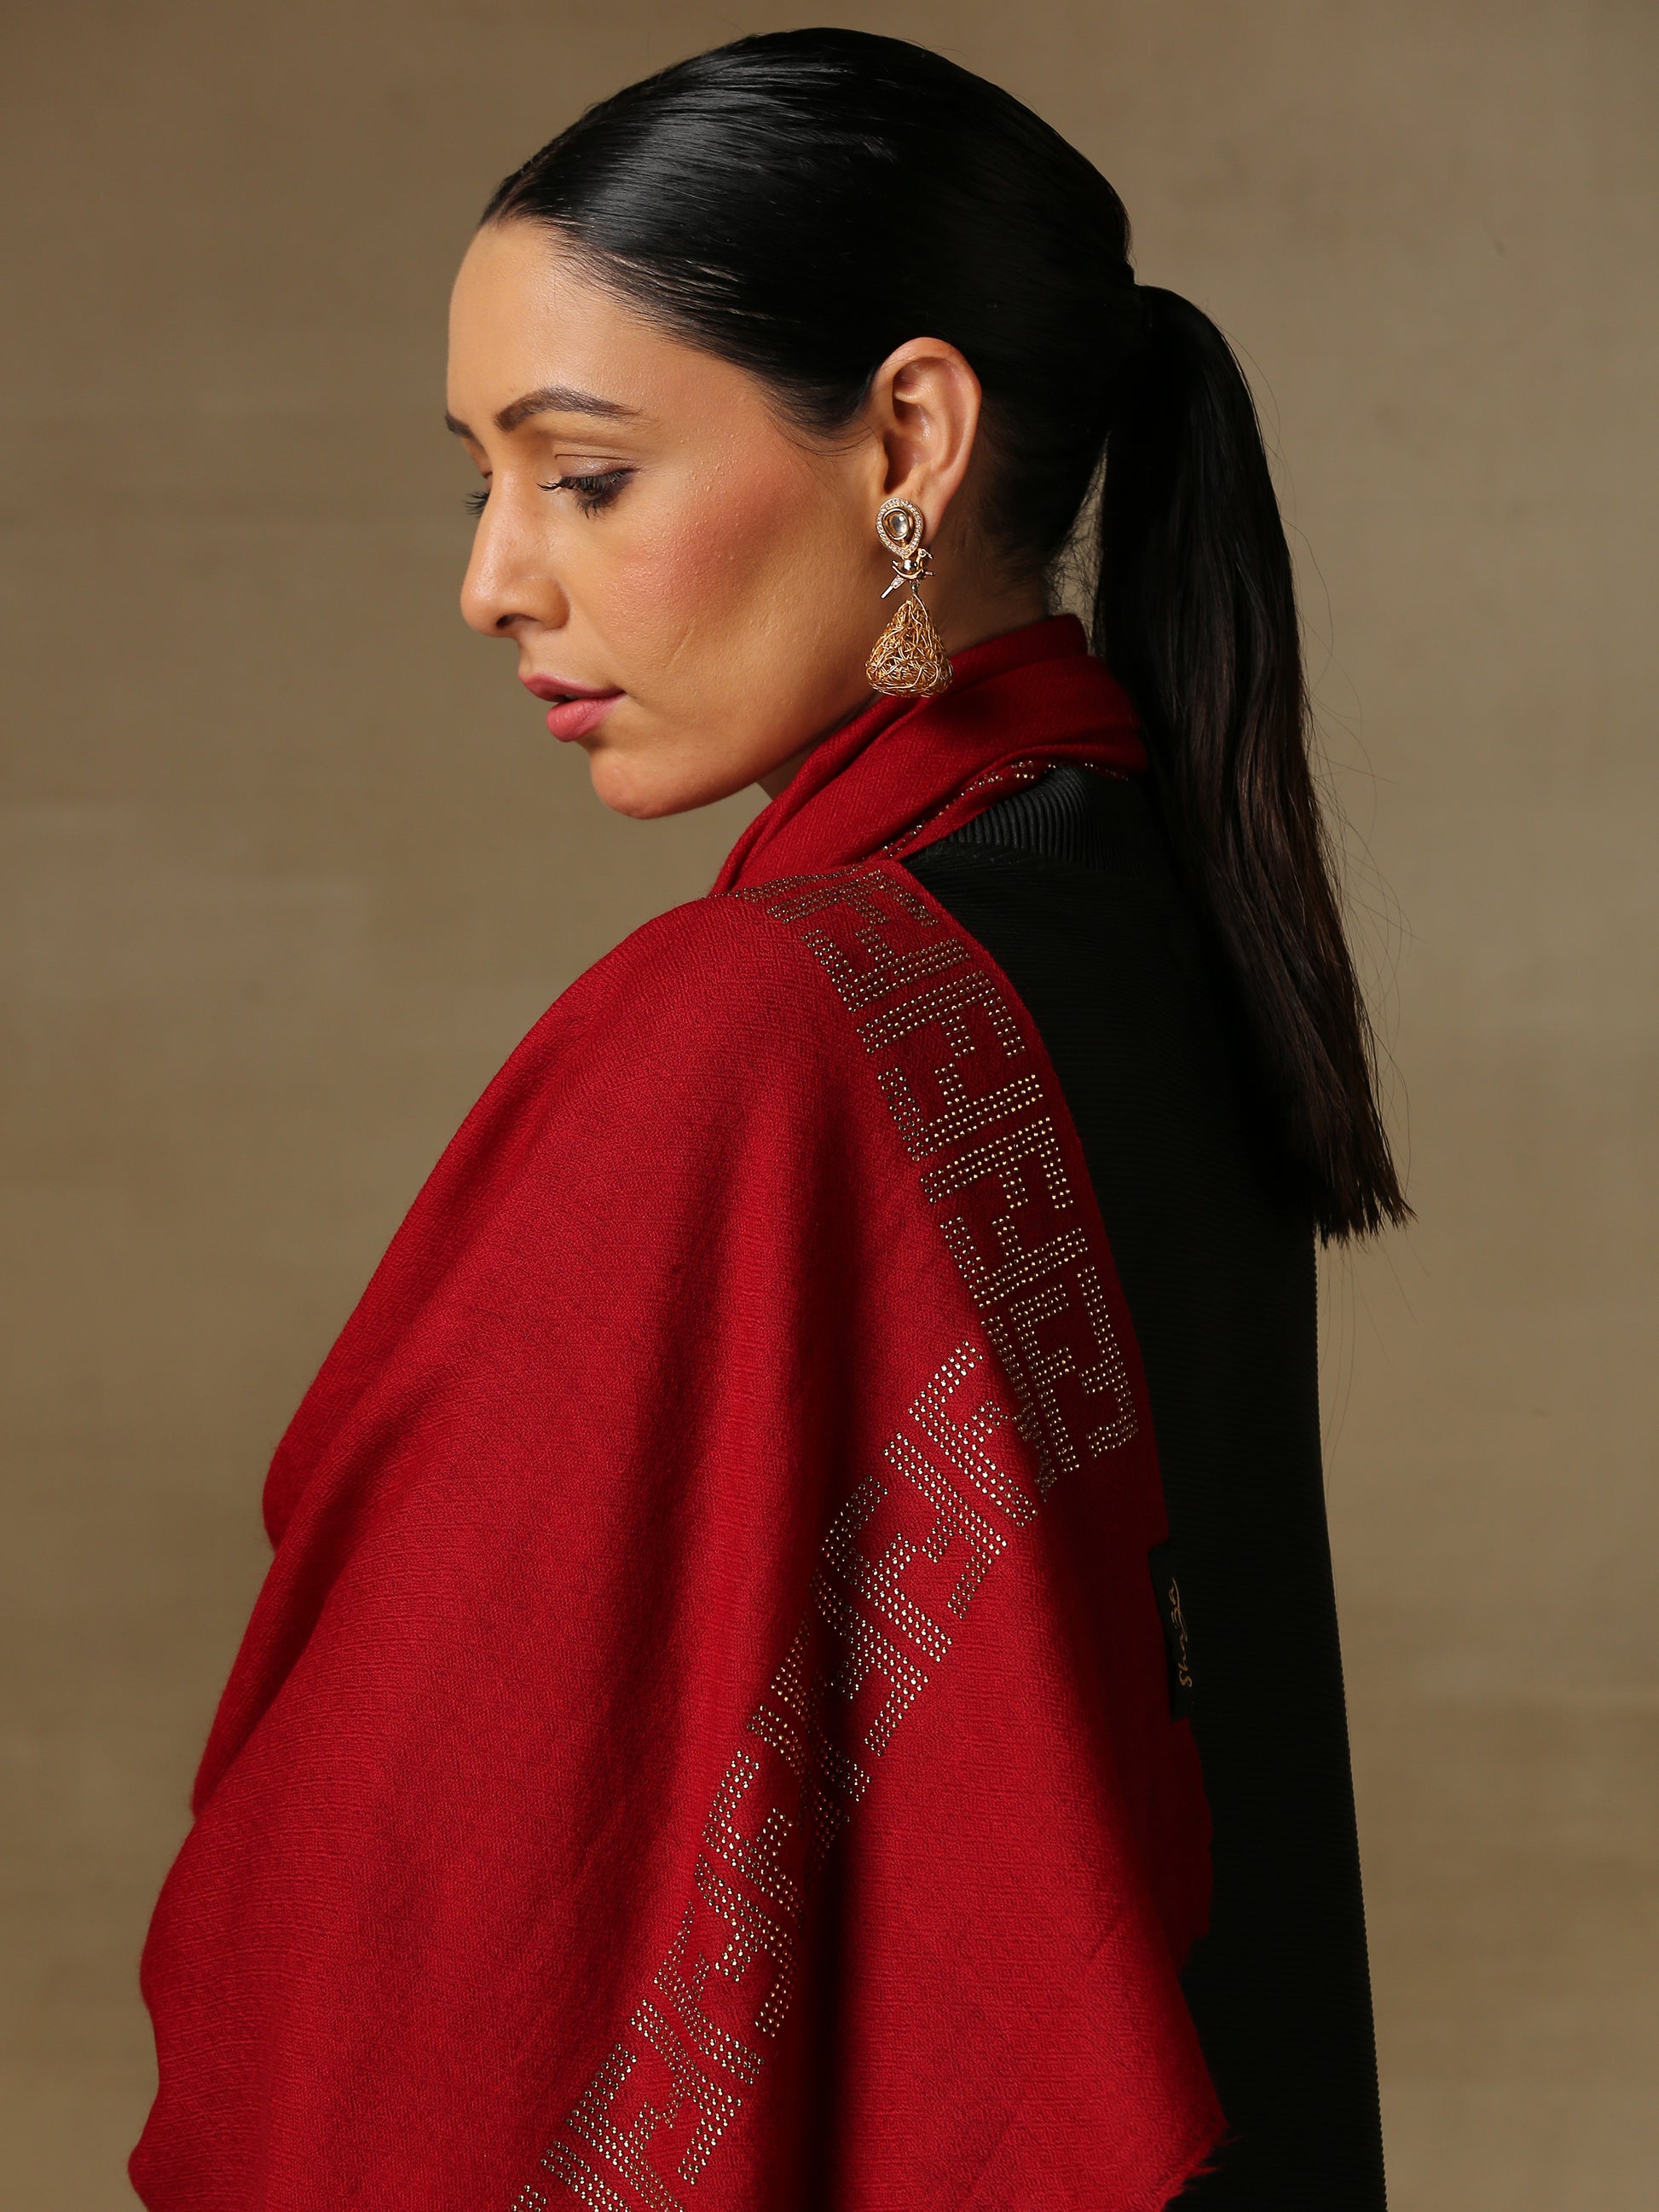 Model is wering a maroon coloured stole from the Era of Zaywar Border Swarovski Stole collection, hand embellished with gold swarovski in an abstract design.